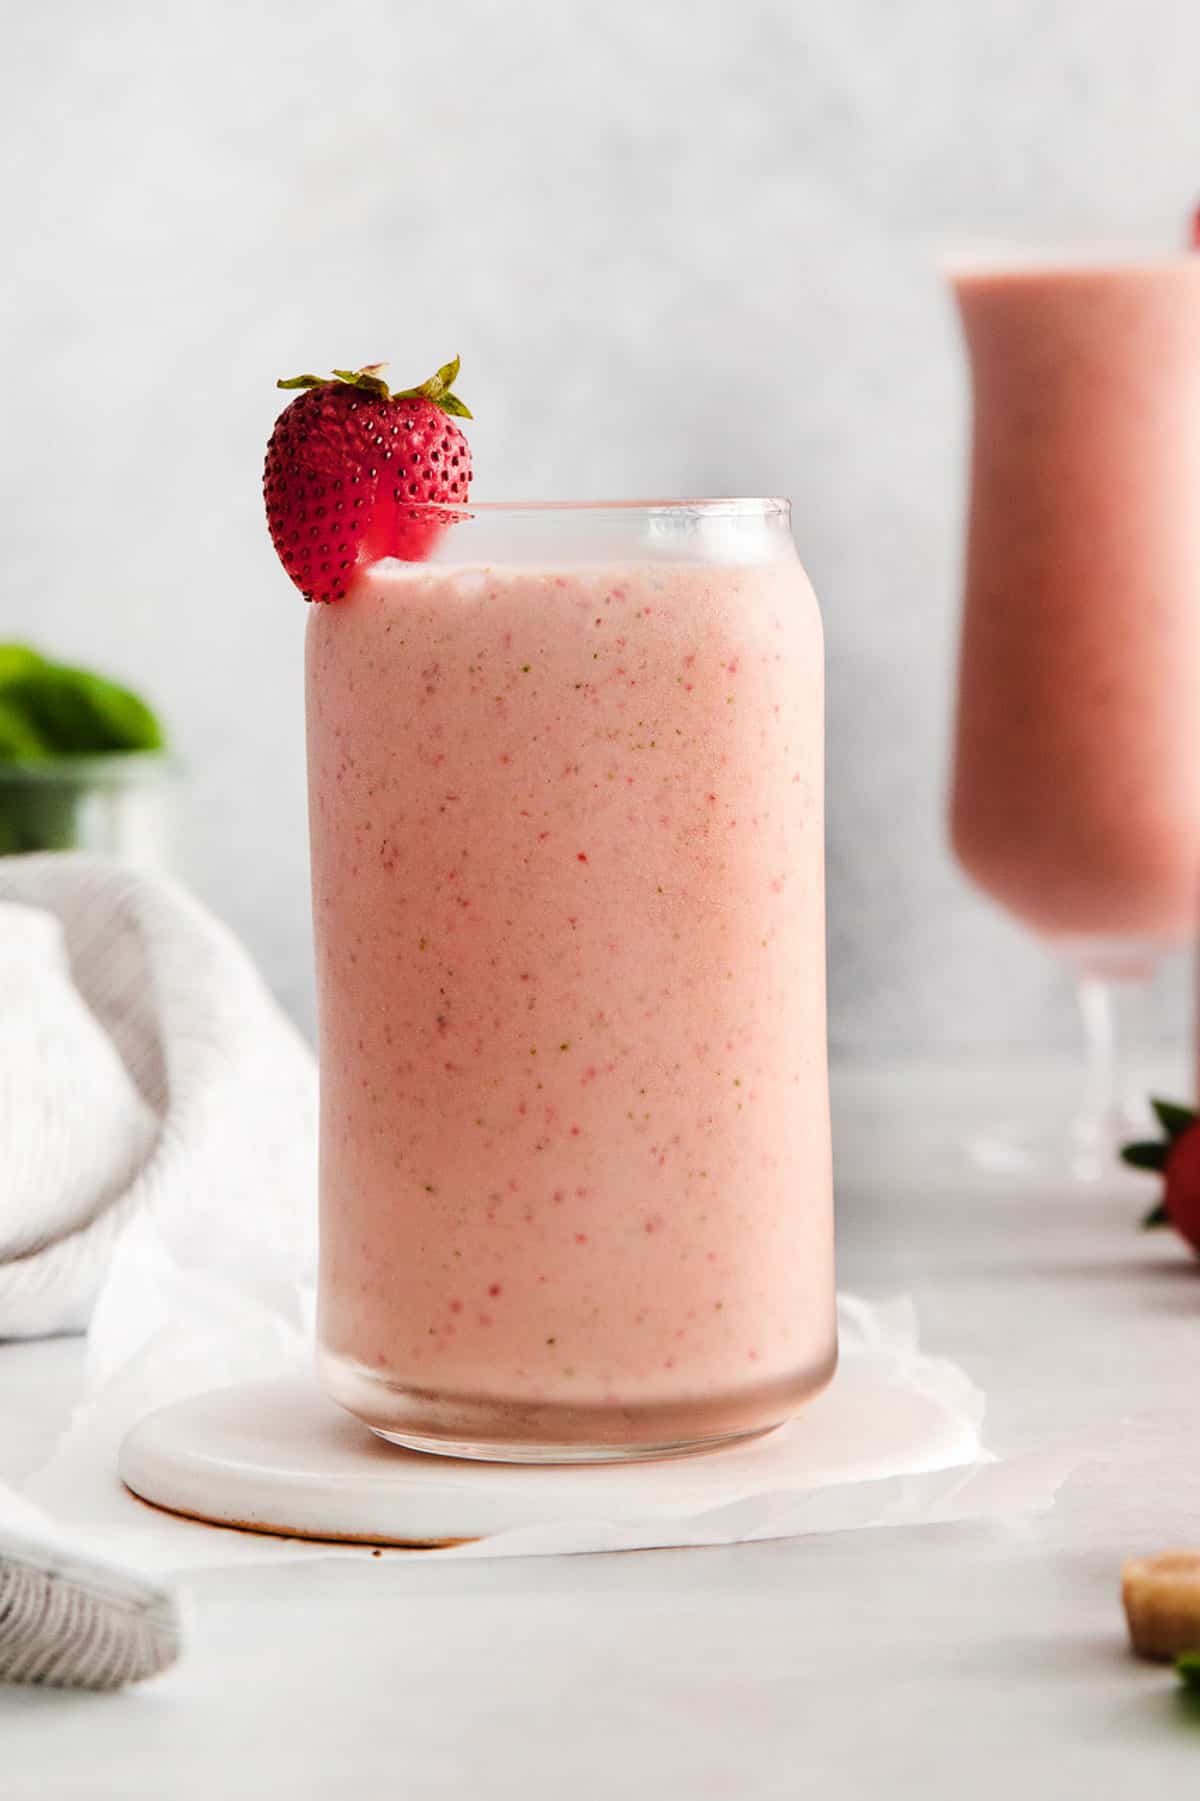 A close up of the strawberry spinach smoothie in a glass with a fresh strawberry on top